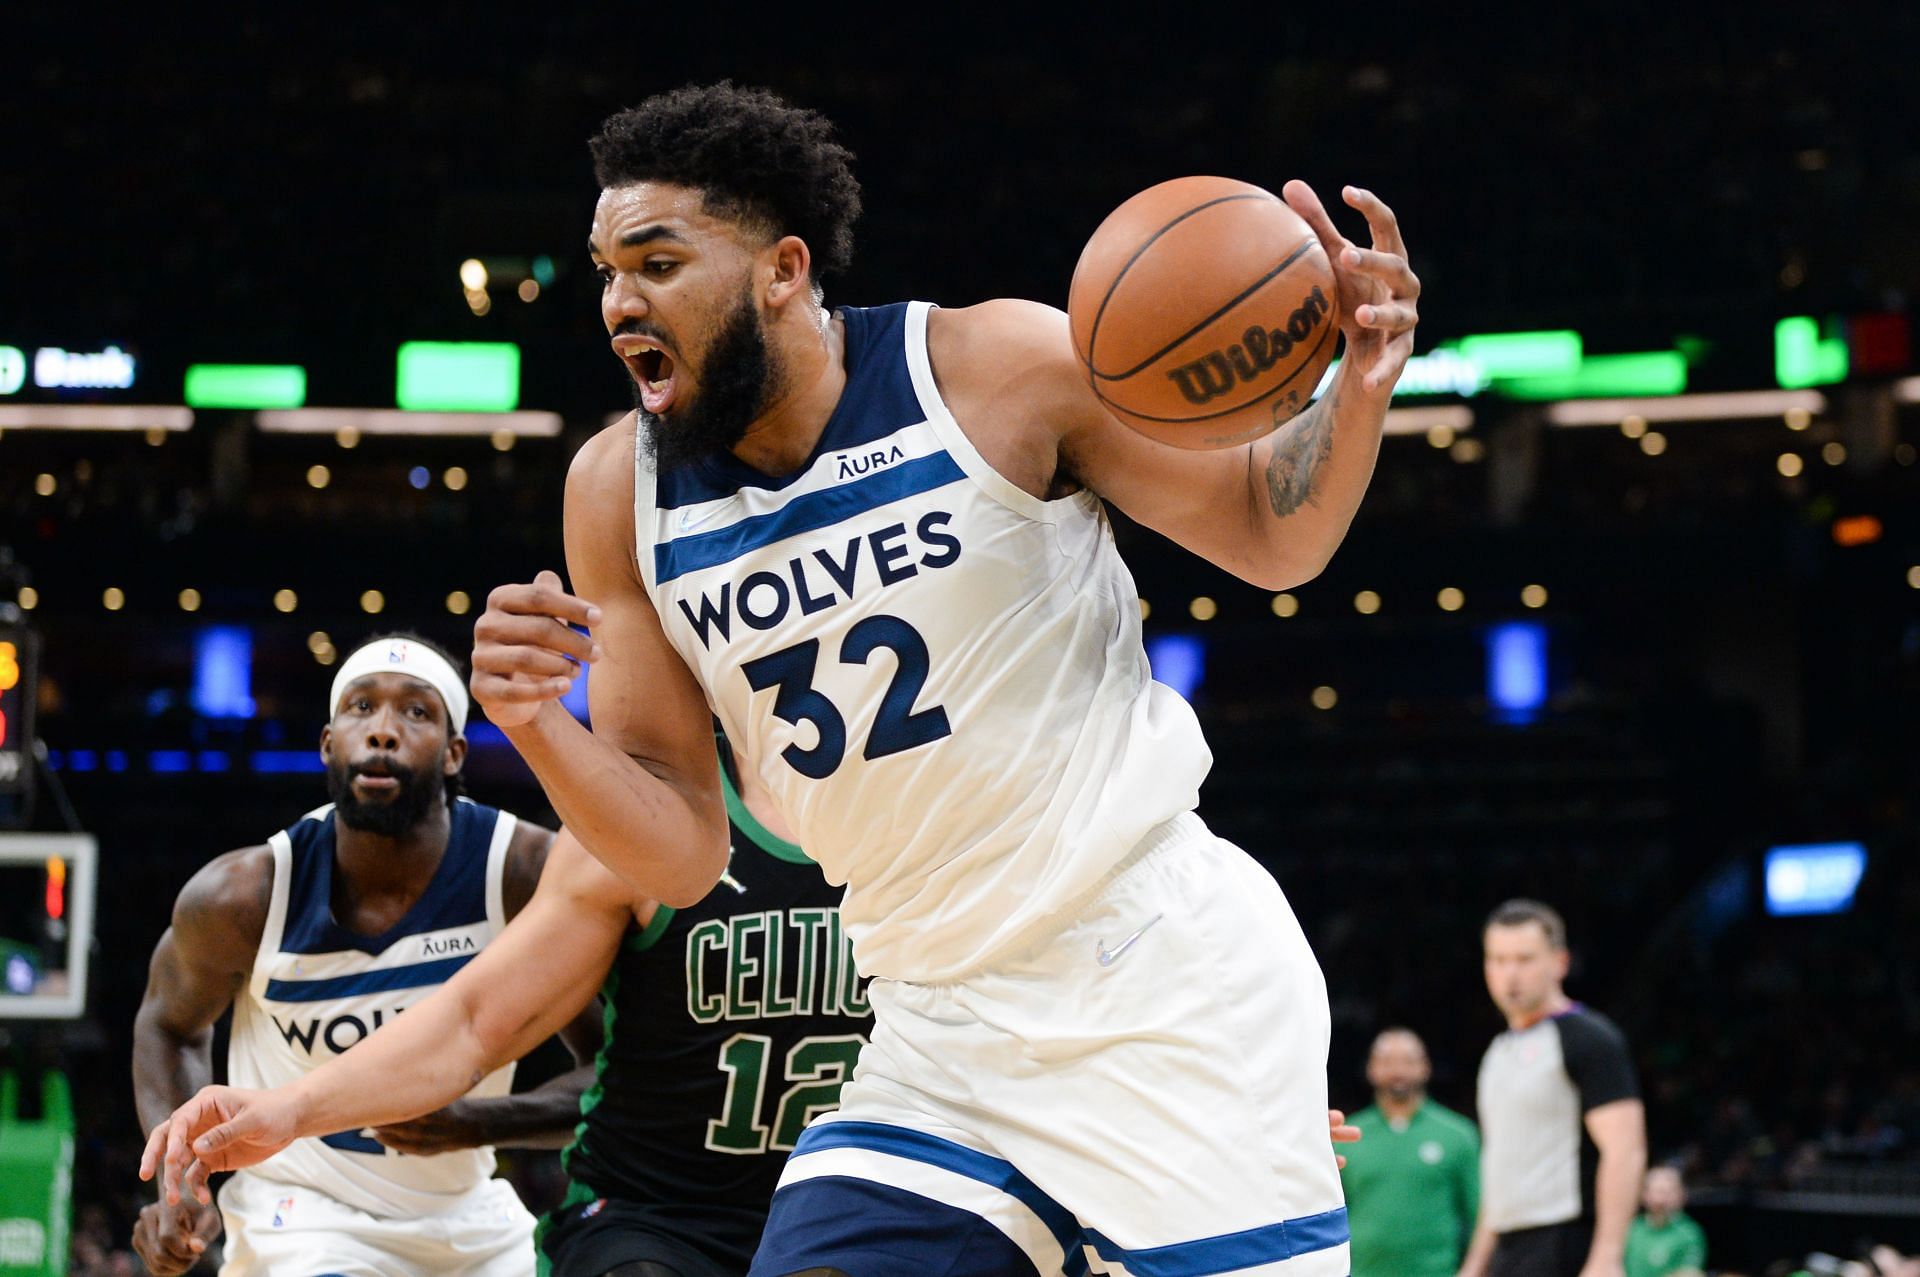 Minnesota Timberwolves will face the Toronto Raptors at the Scotiabank Arena on Wednesday.